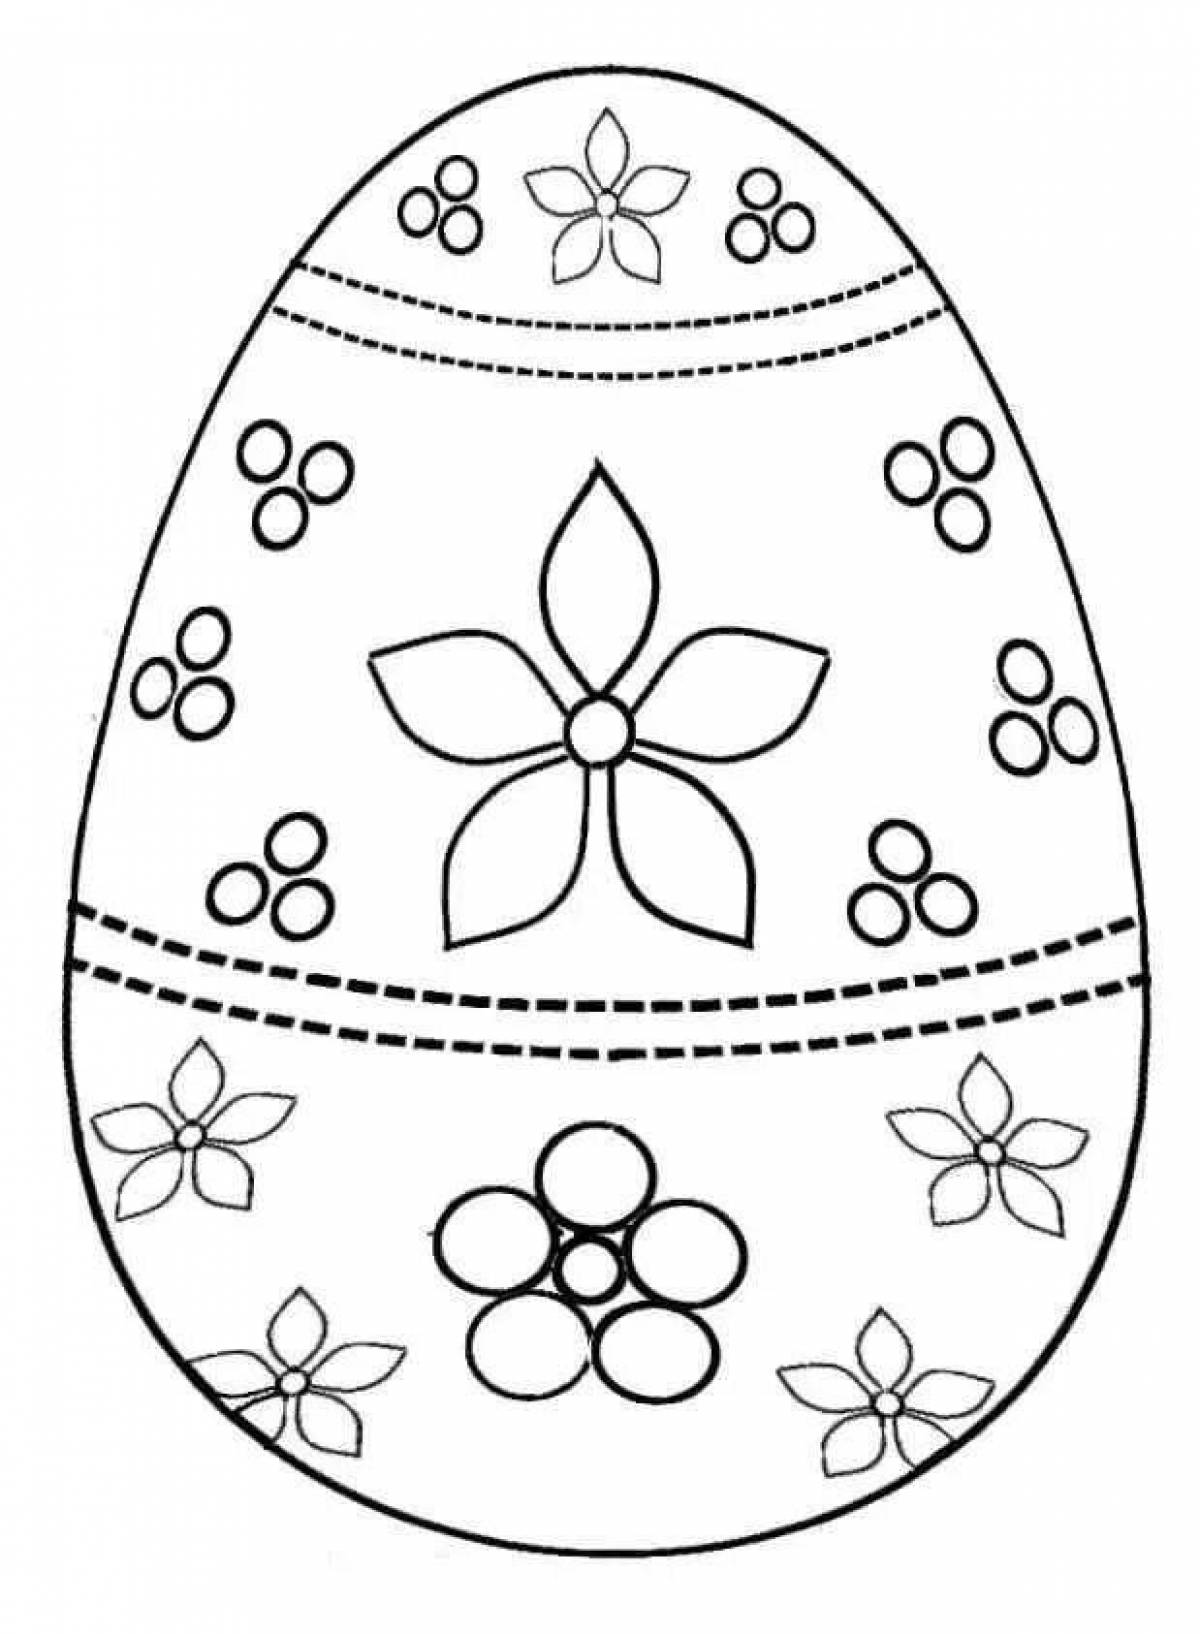 Amazing Easter egg coloring page